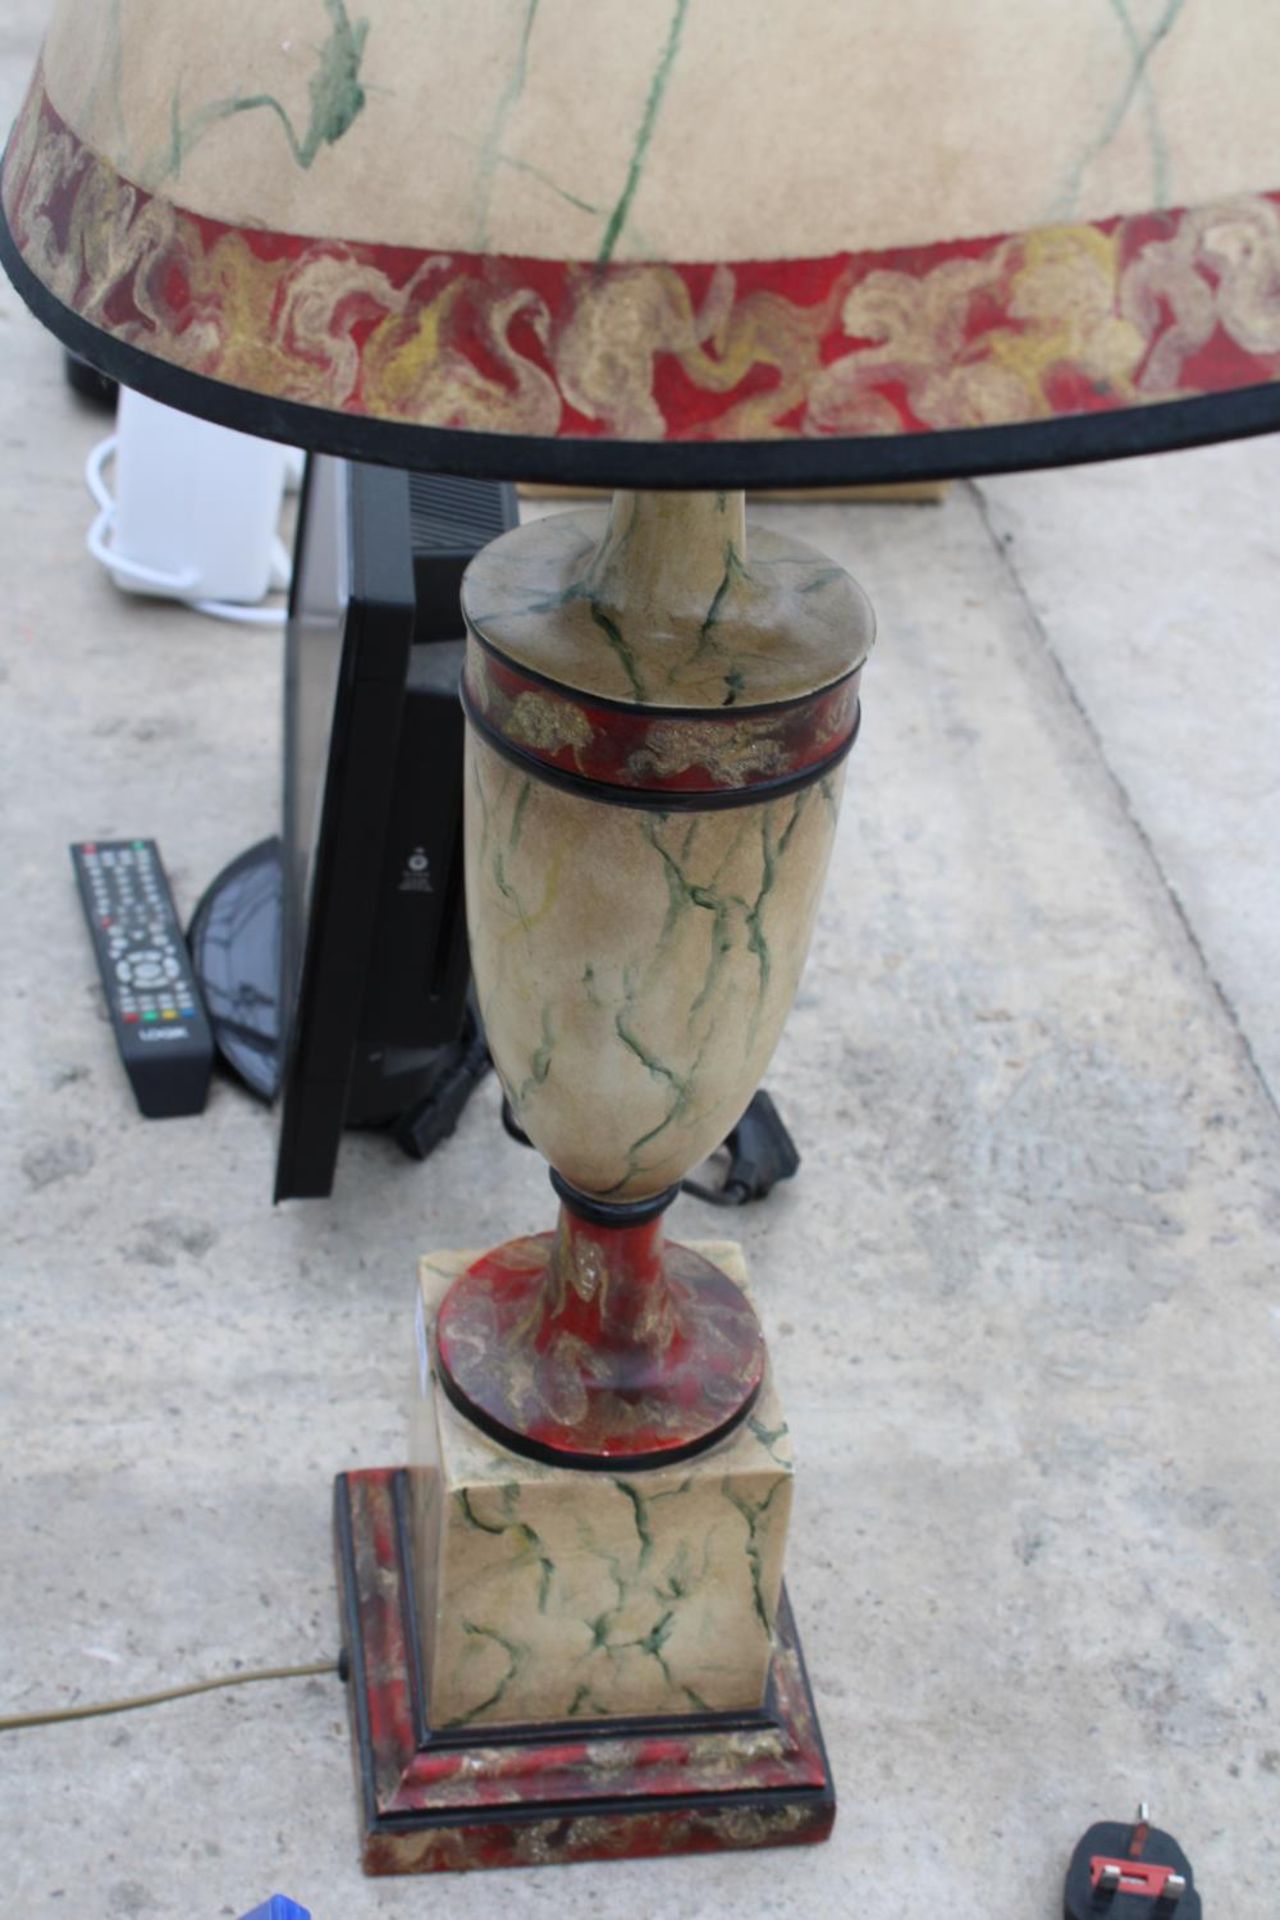 A LARGE ORNATE AND DECORATIVE TABLE LAMP WITH SHADE - Image 3 of 3